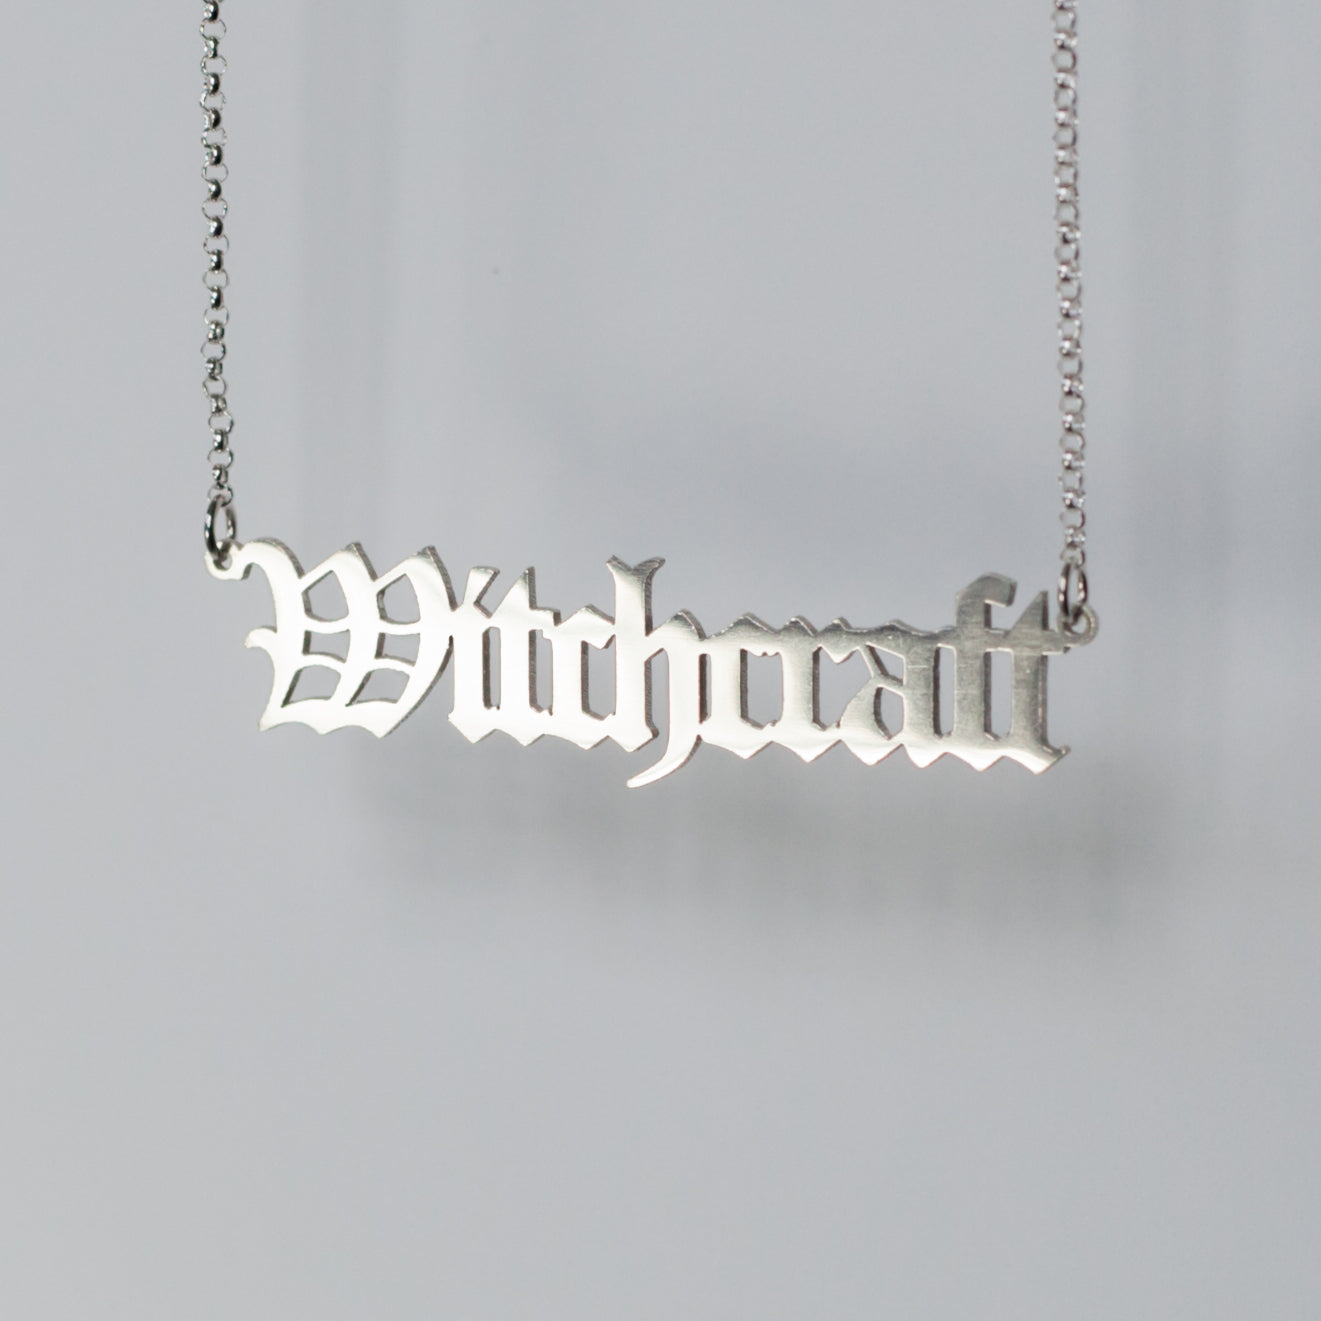 Witchcraft Necklace in gothic blackletter font in sterling silver